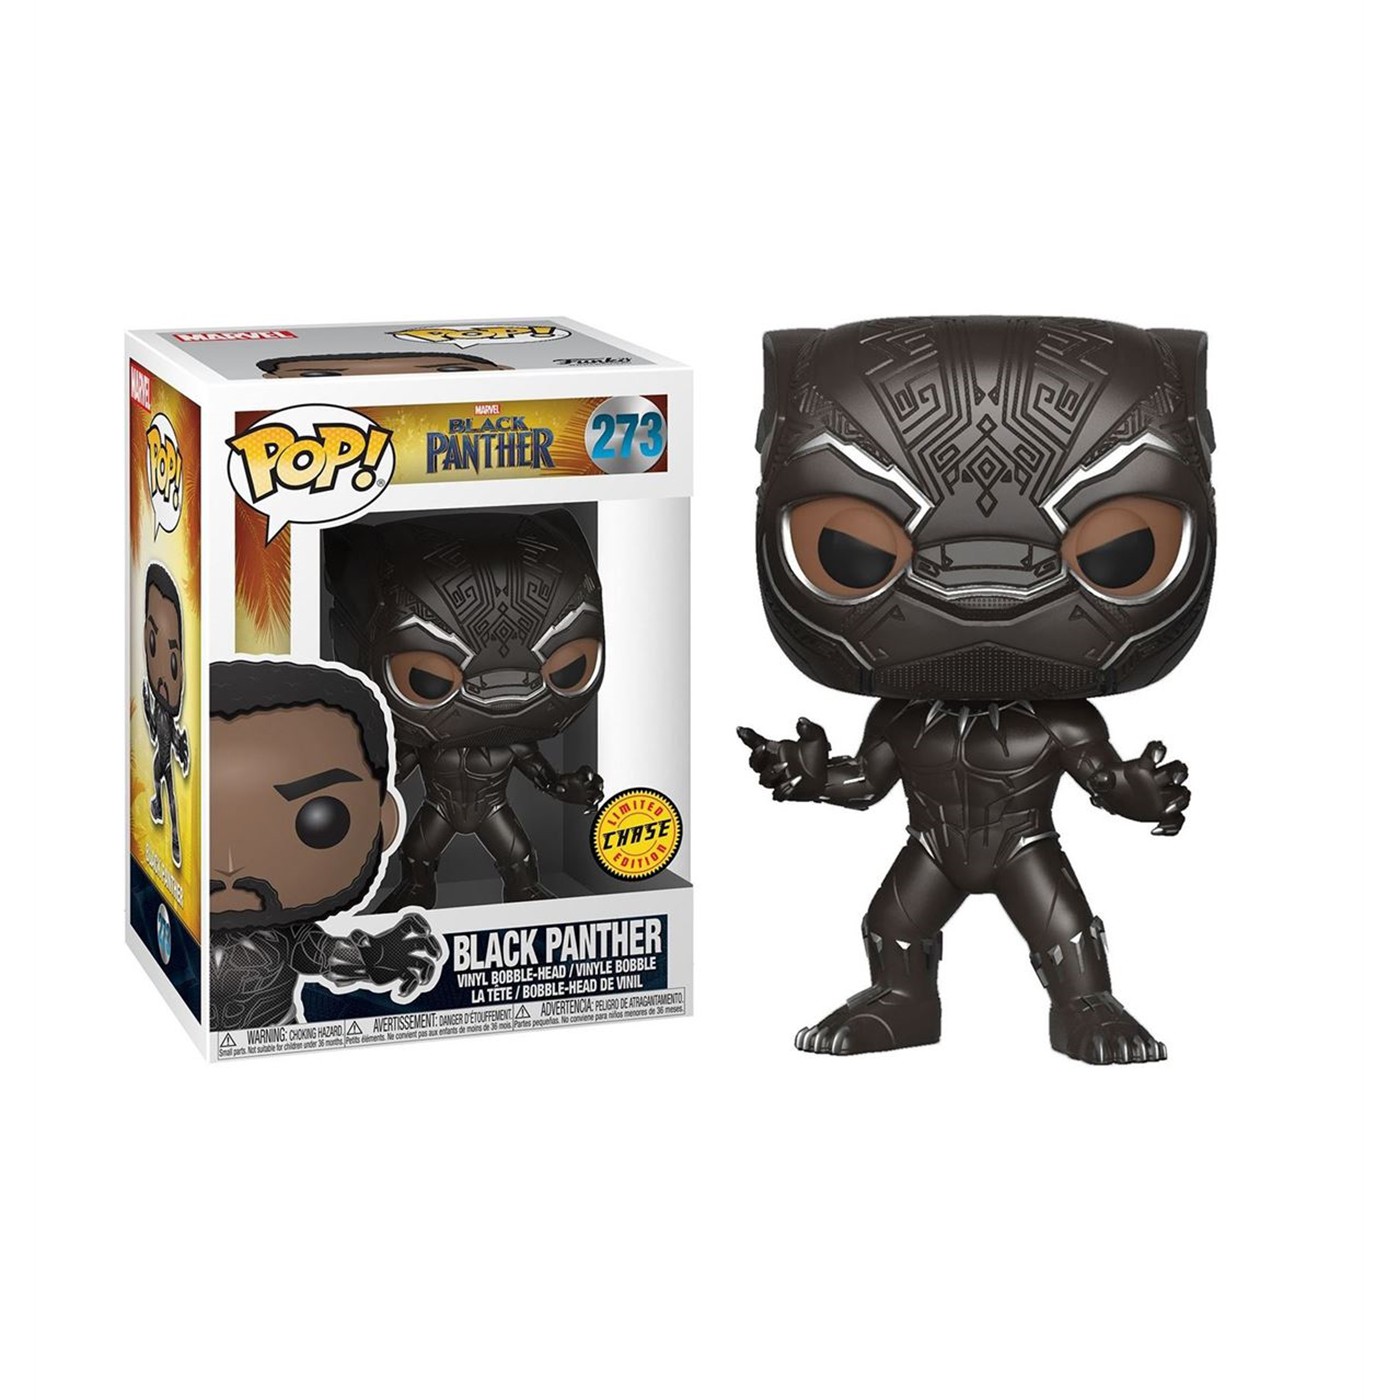 Black Panther Movie Funko Chase Pop Bobble Head